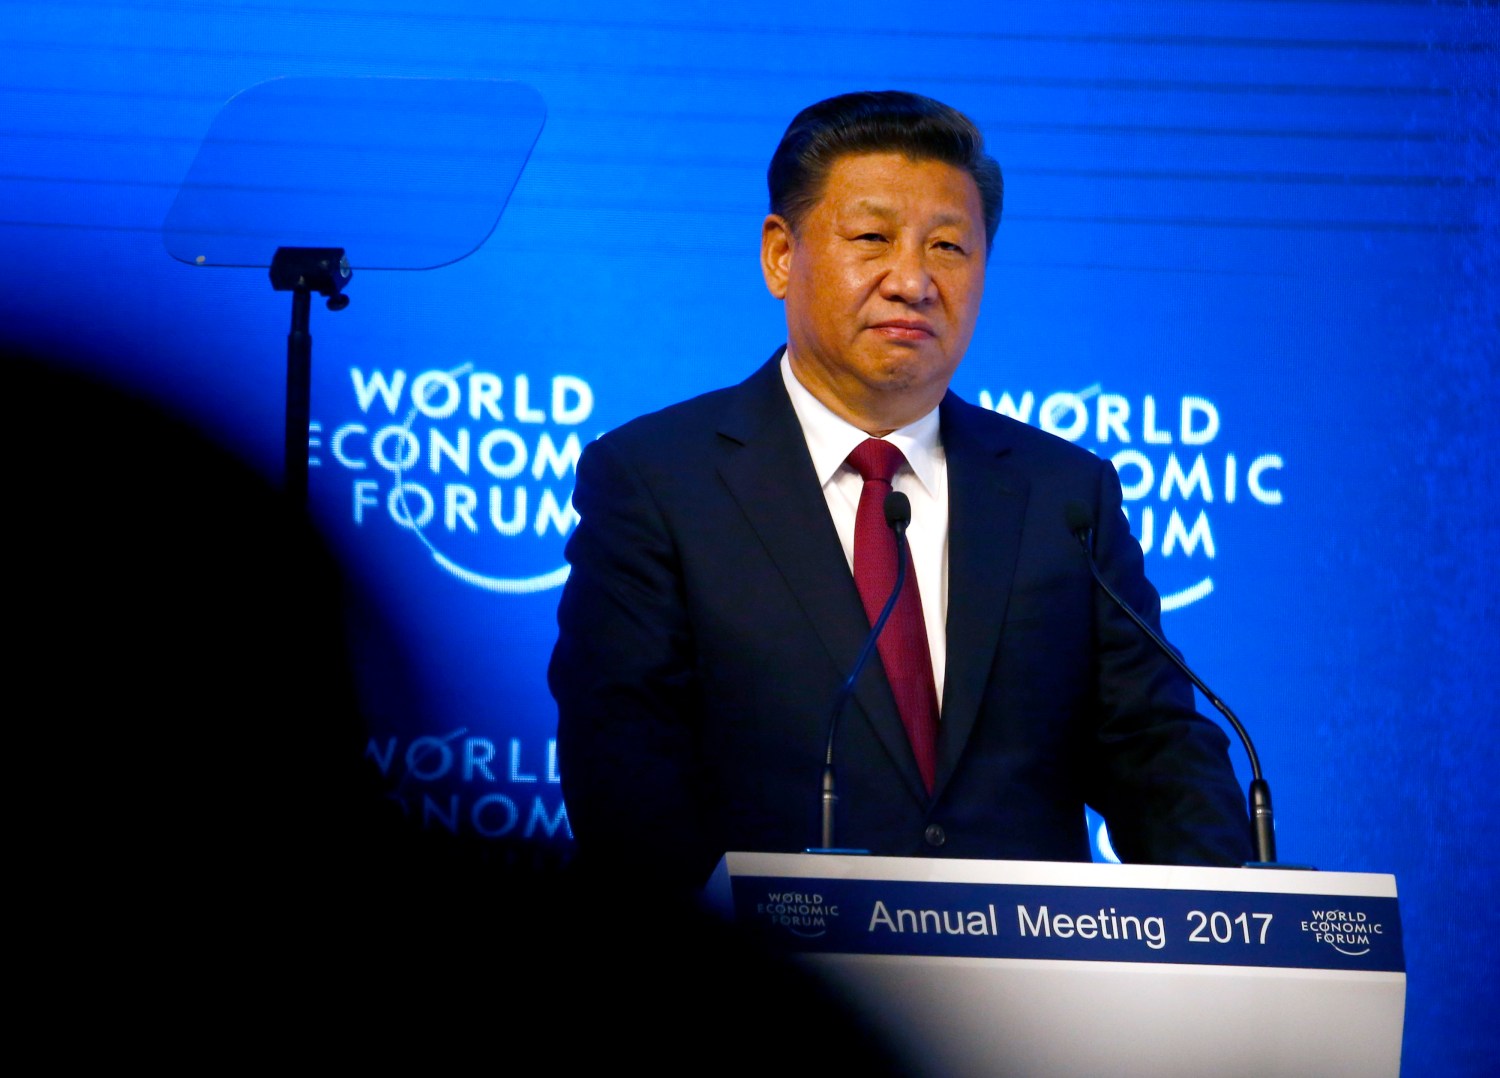 Chinese President Xi Jinping attends the World Economic Forum (WEF) annual meeting in Davos, Switzerland January 17, 2017. REUTERS/Ruben Sprich